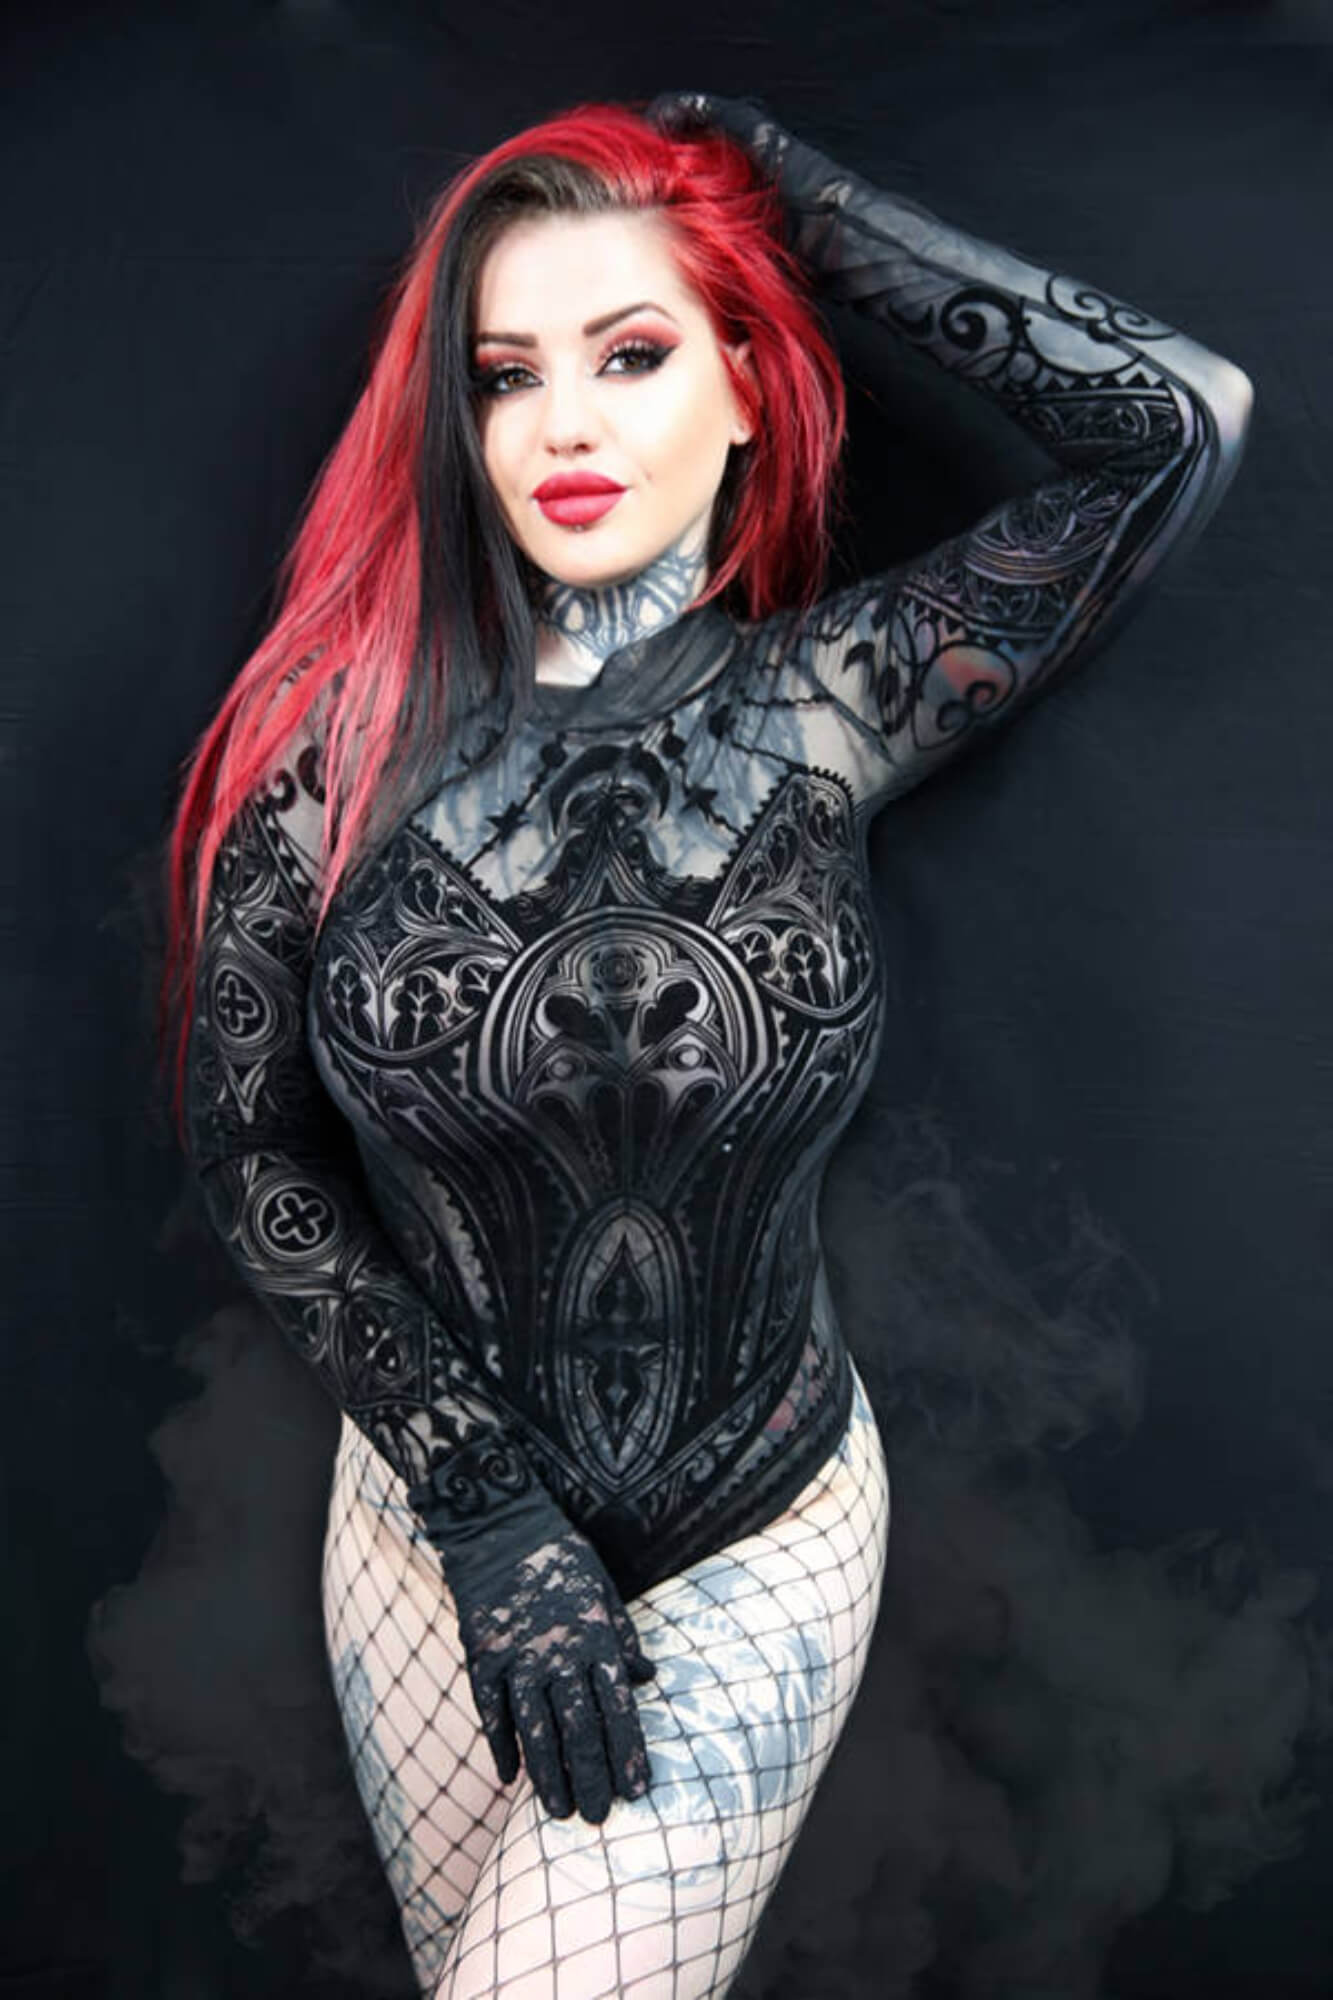 Restyle Gothic Cathedral Corset Mesh Sexy Sheer Bodysuit,